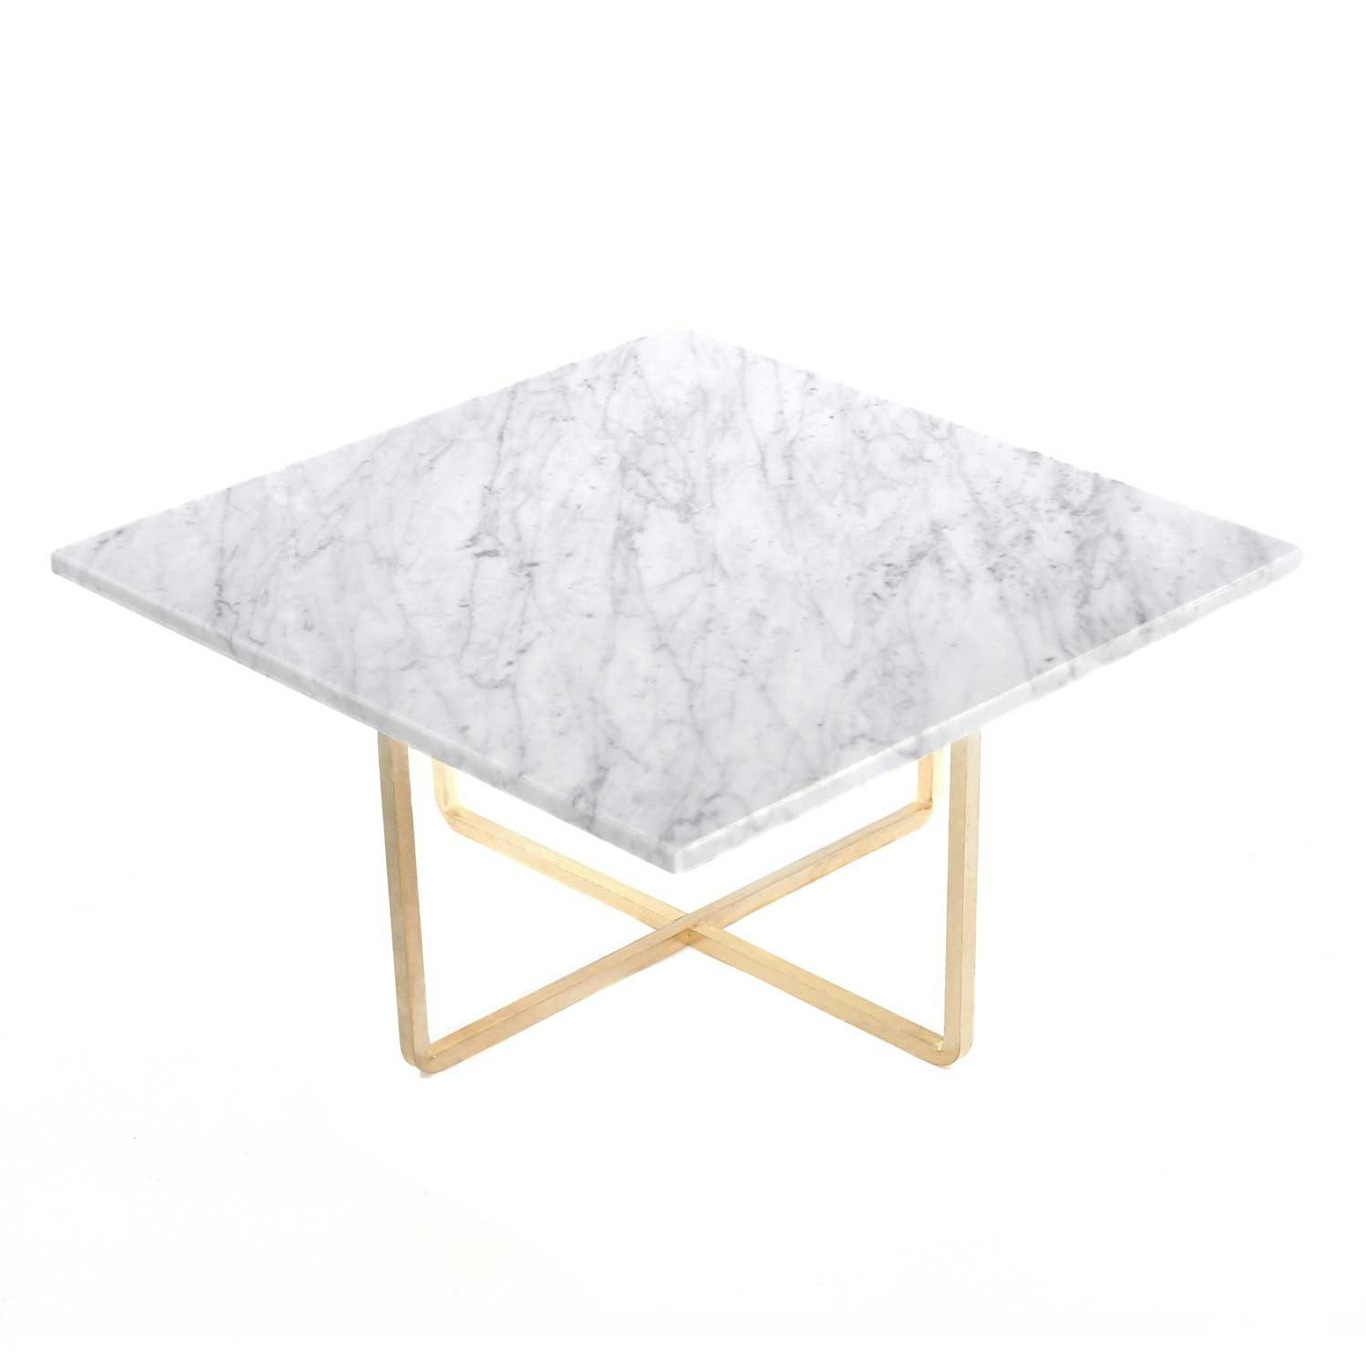 Ninety Coffee Table 60 cm, Brass Base, White Marble